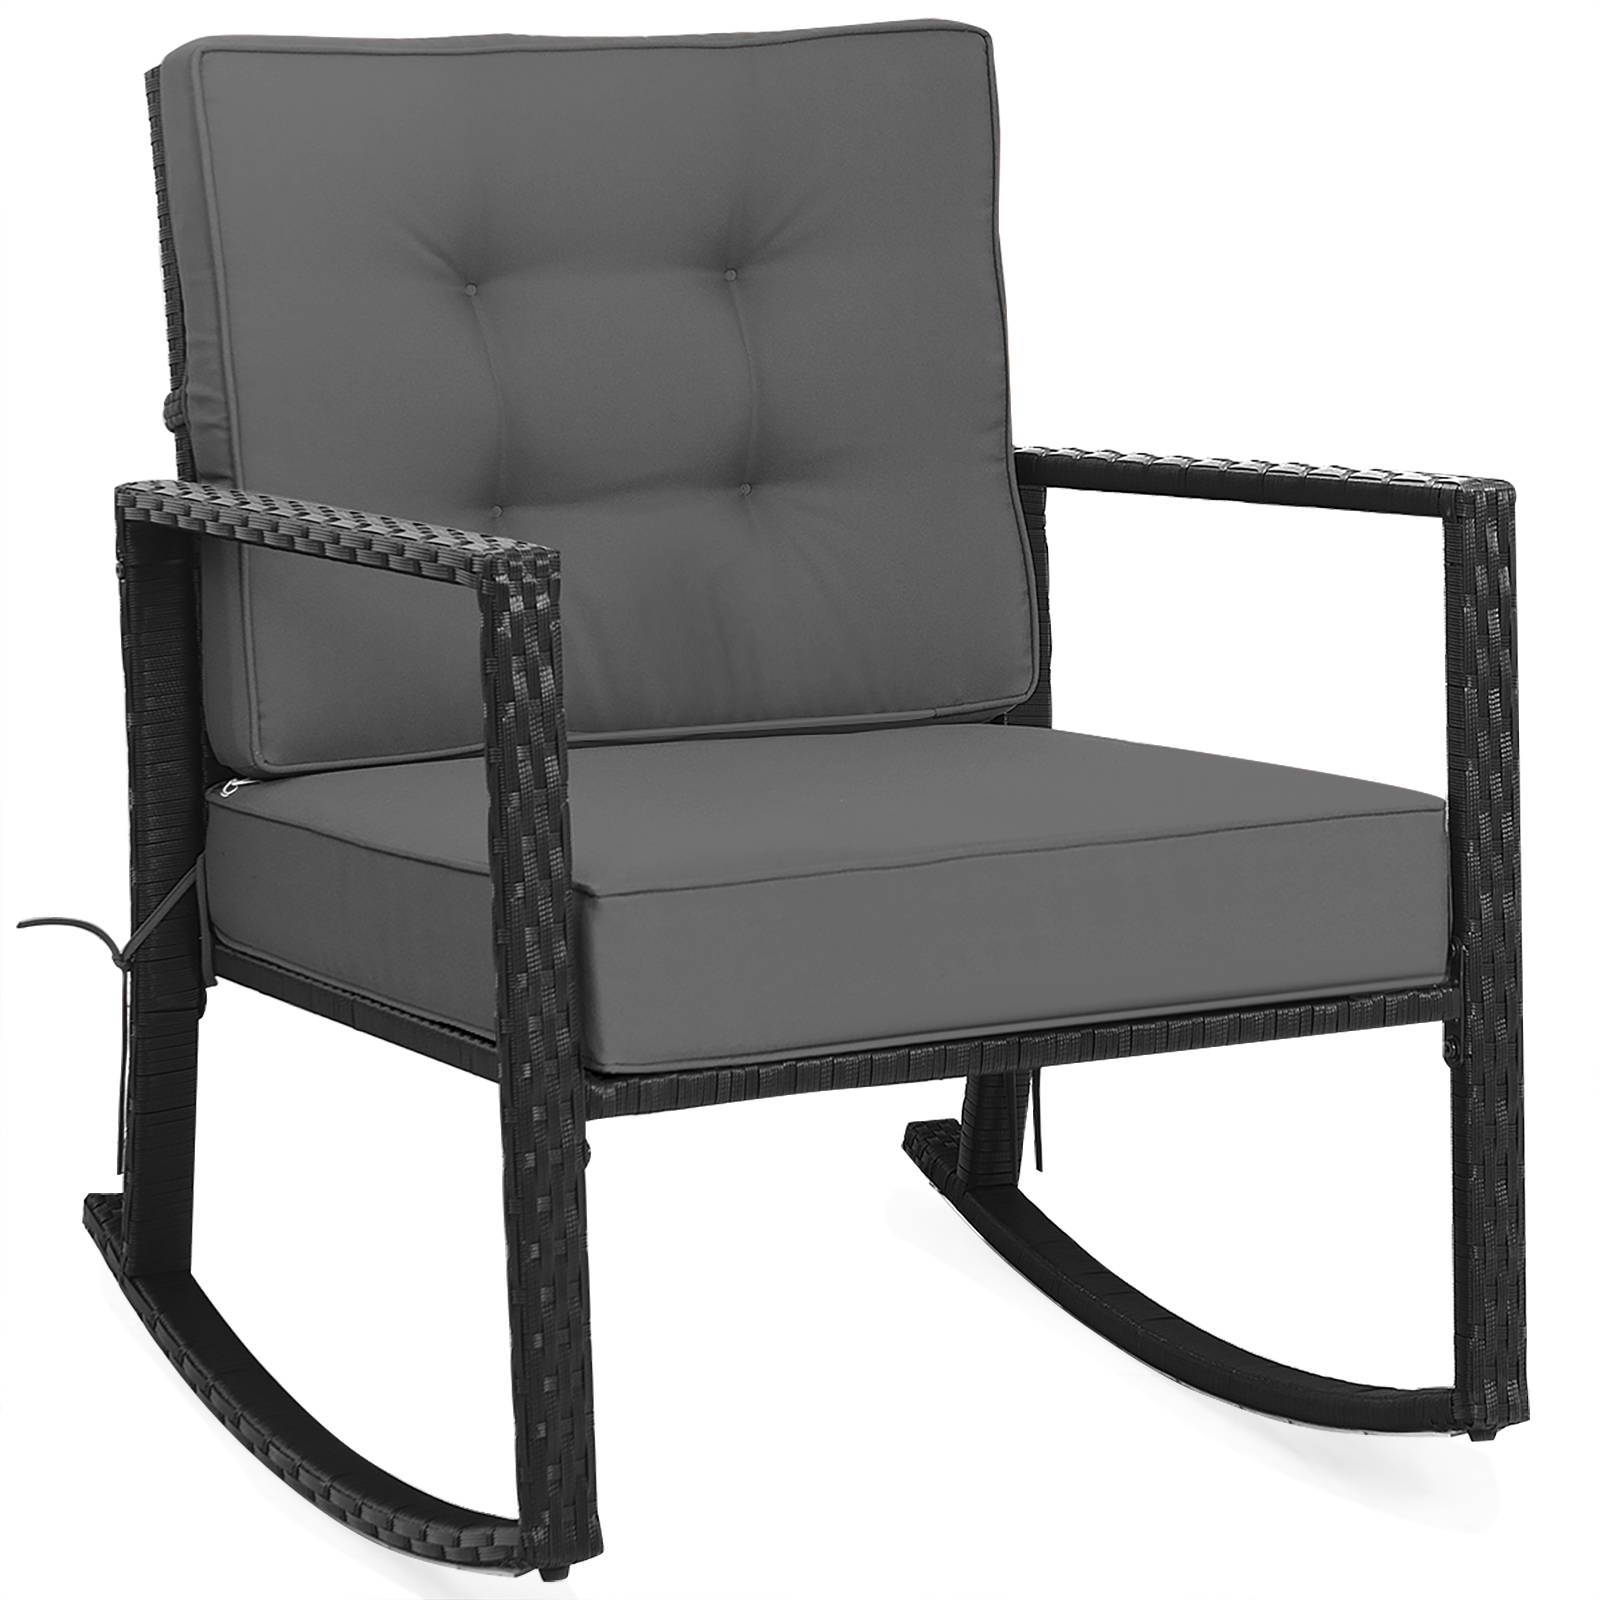 Patiojoy Outdoor Wicker Rocking Chair Glider Rattan Rocker Recliner with Grey Cushion - image 4 of 6